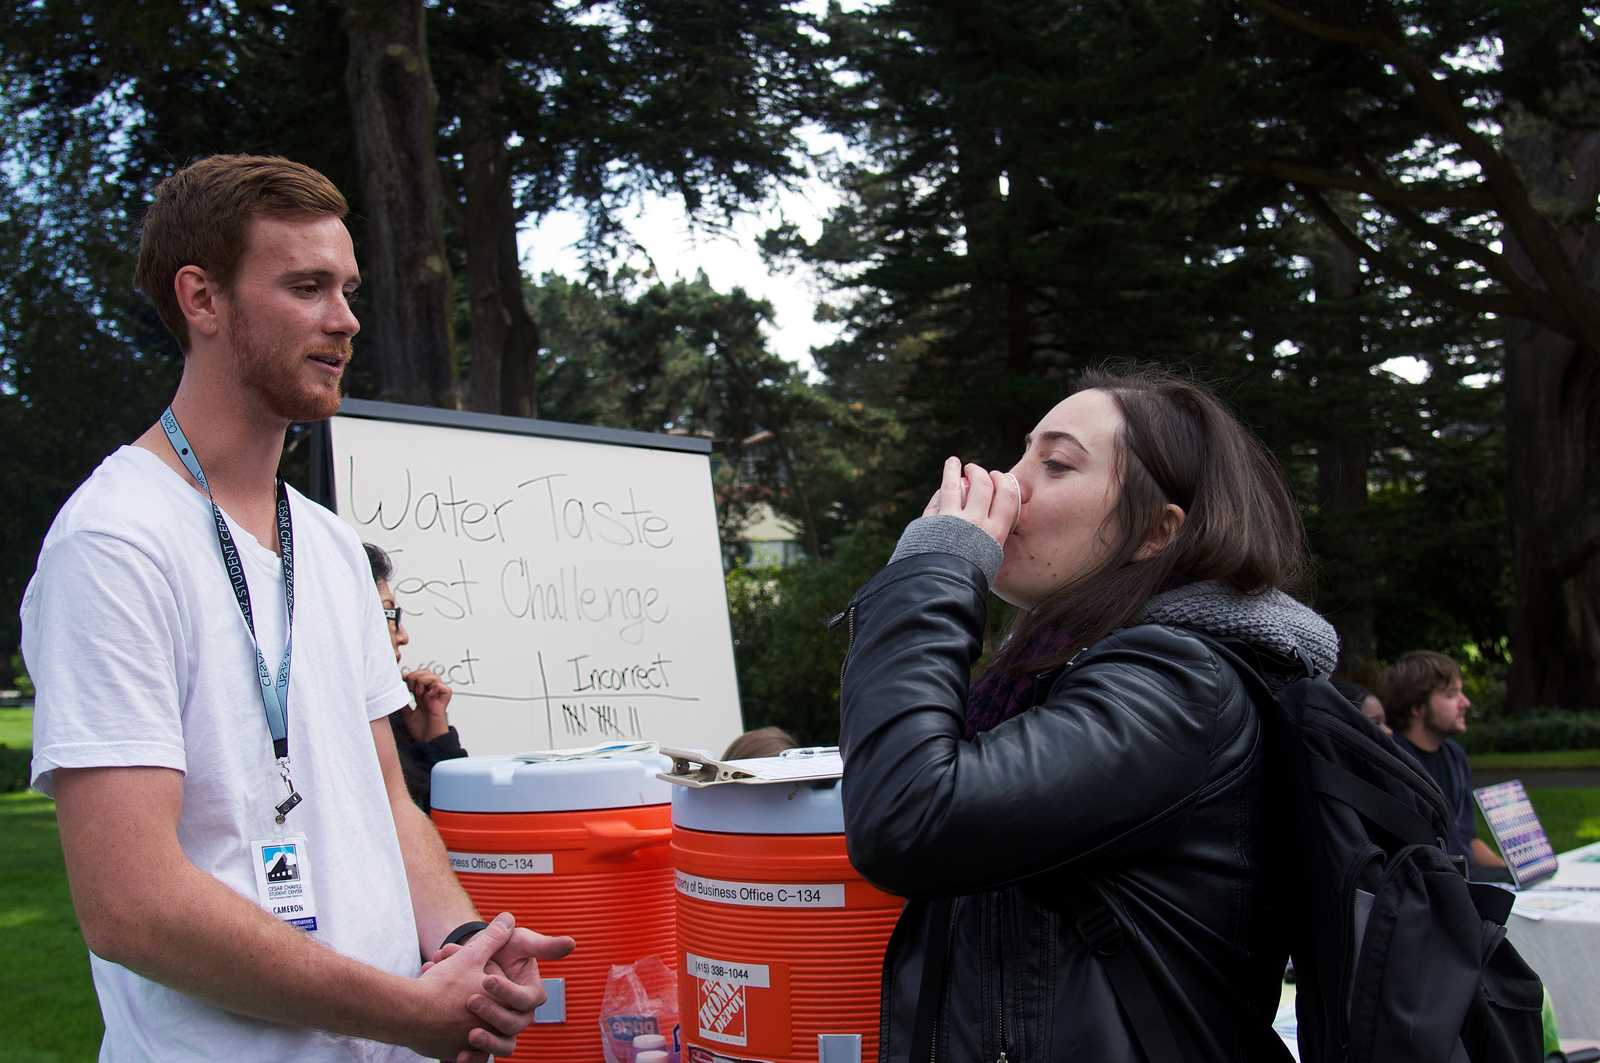 Cameron Bingley watches as Daisy Gerstein takes a water taste test challenge during the sustainability fair in the quad at SF State on Wednesday 23, 2013. Photo by Kate O'Neal / Xpress 